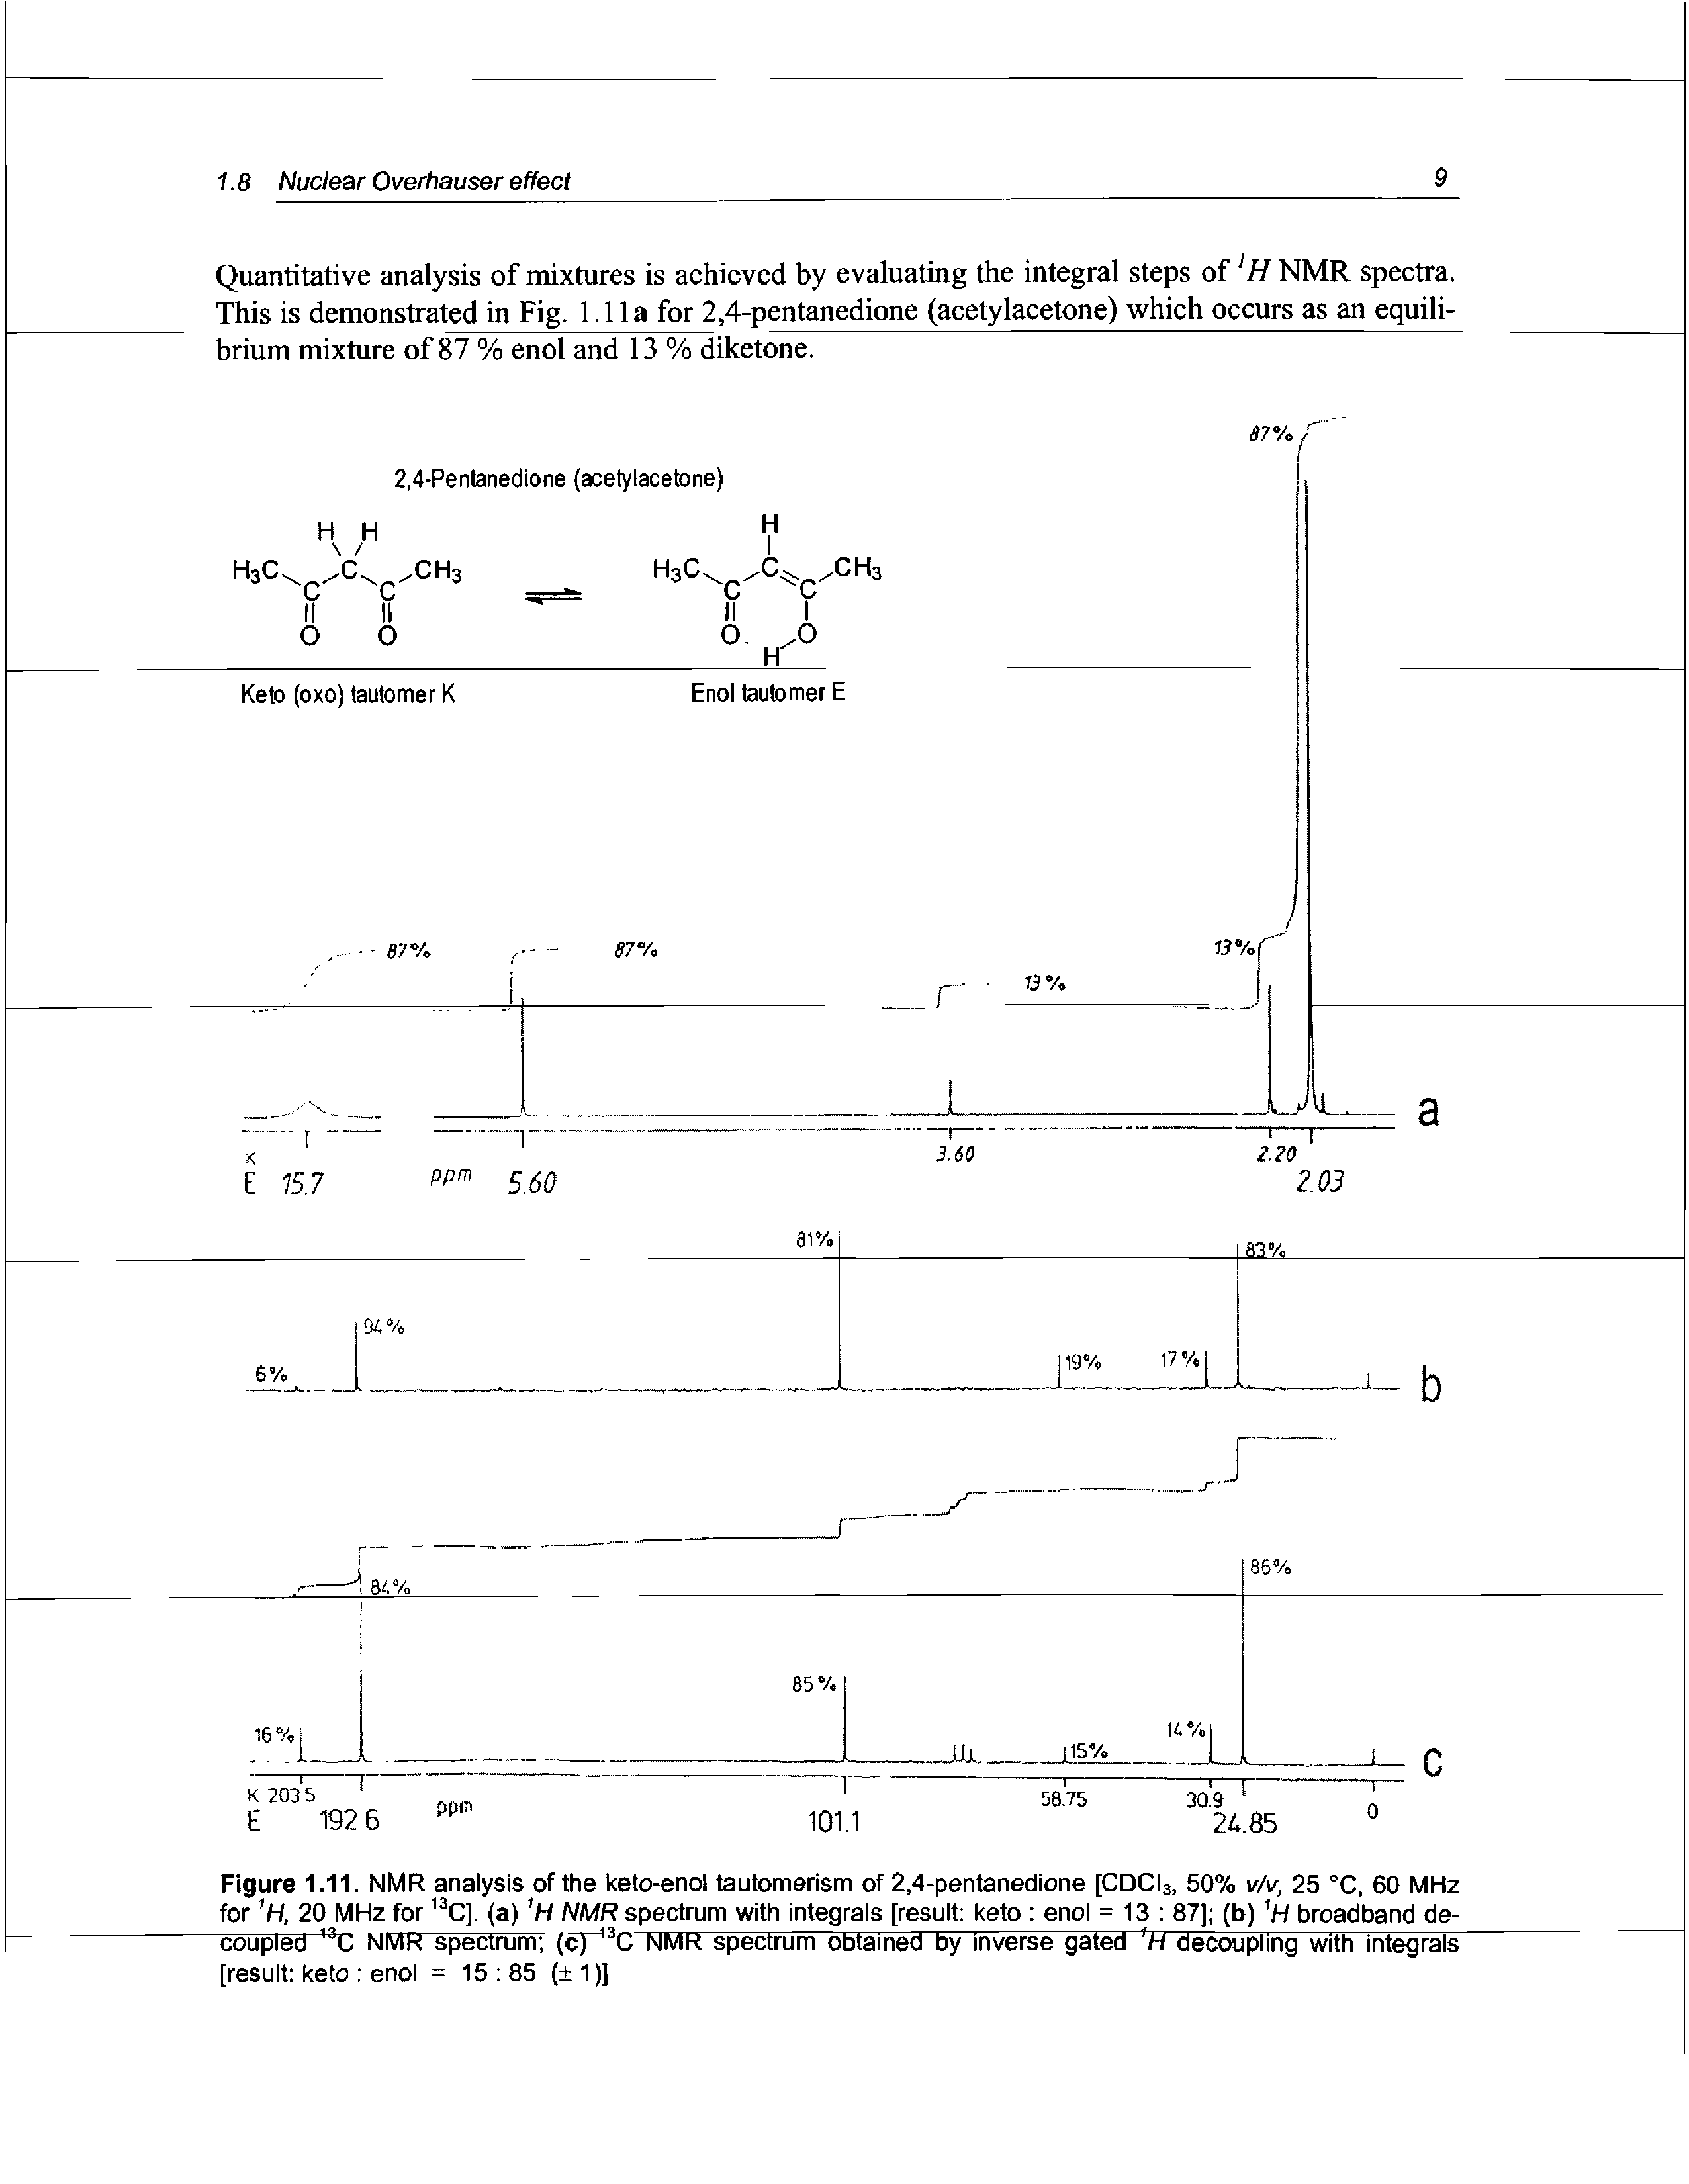 Figure 1.11. NMR analysis of the keto-enol tautomerism of 2,4-pentanedione [CDCI3, 50% v/v, 25 °C, 60 MHz for H, 20 MHz for 13C]. (a) 1H NMR spectrum with integrals [result keto enol = 13 87] (b) 1H broadband de-coupled 13C nMR spectrum (c) "(J NMR spectrum obtained by inverse gated h decoupling with integrals [result keto enol = 15 85 ( 1)]...